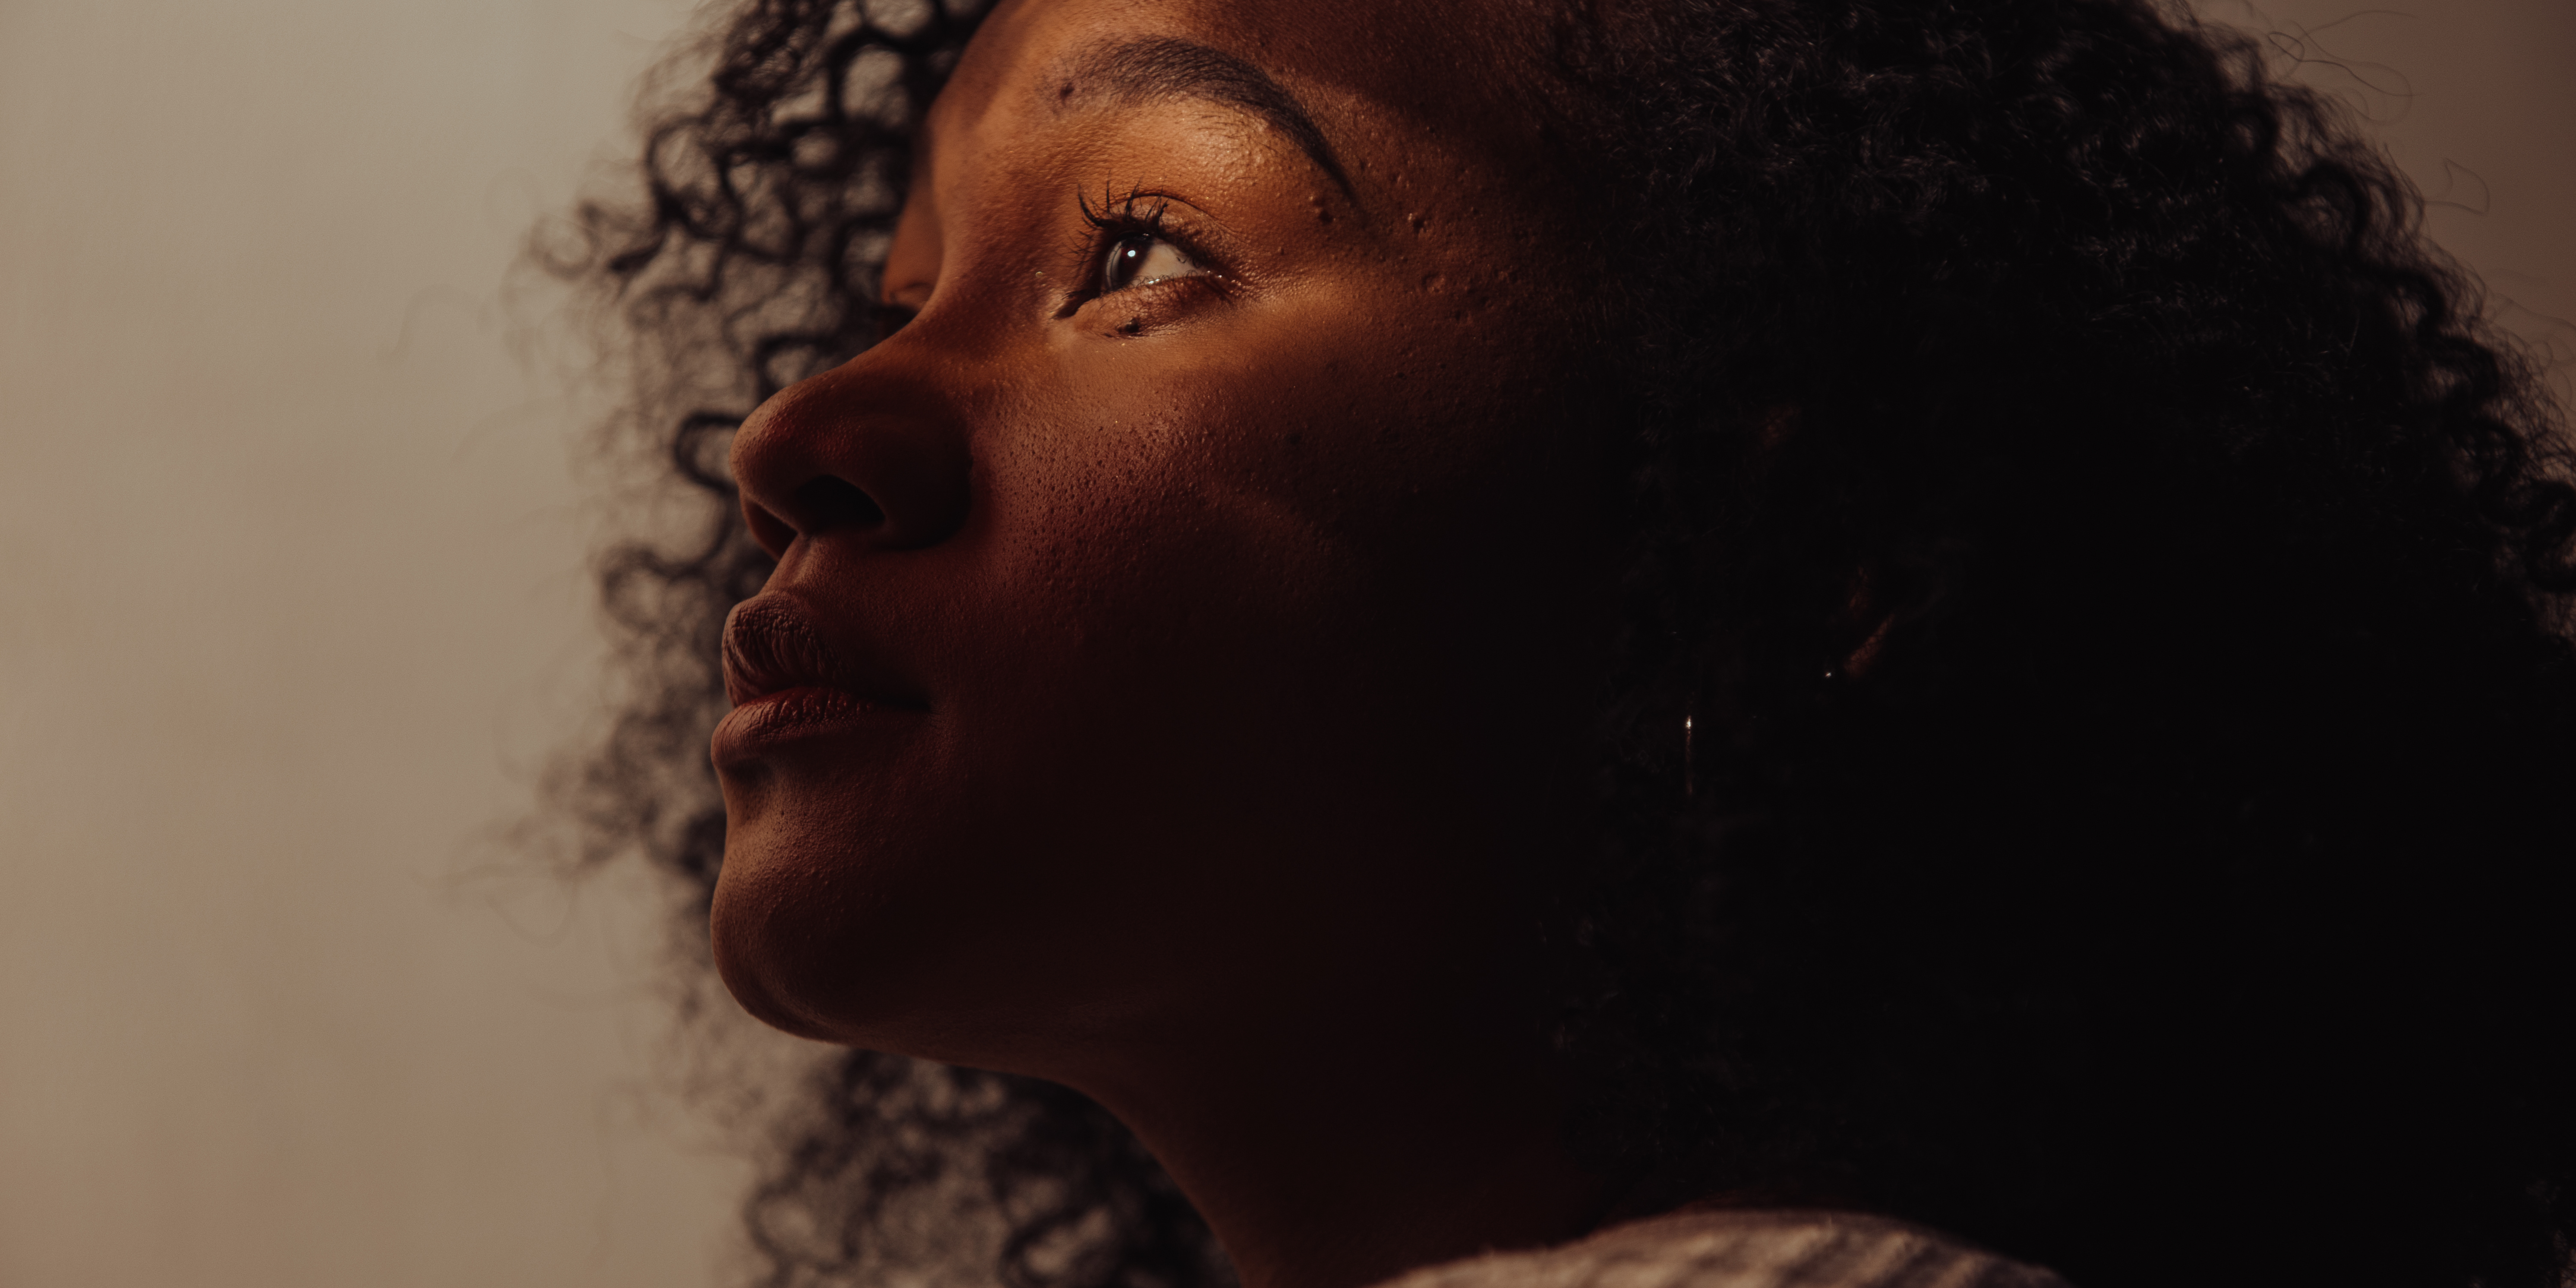 Woman of colour gazing upwards with a contemplative expression, shadow across her face